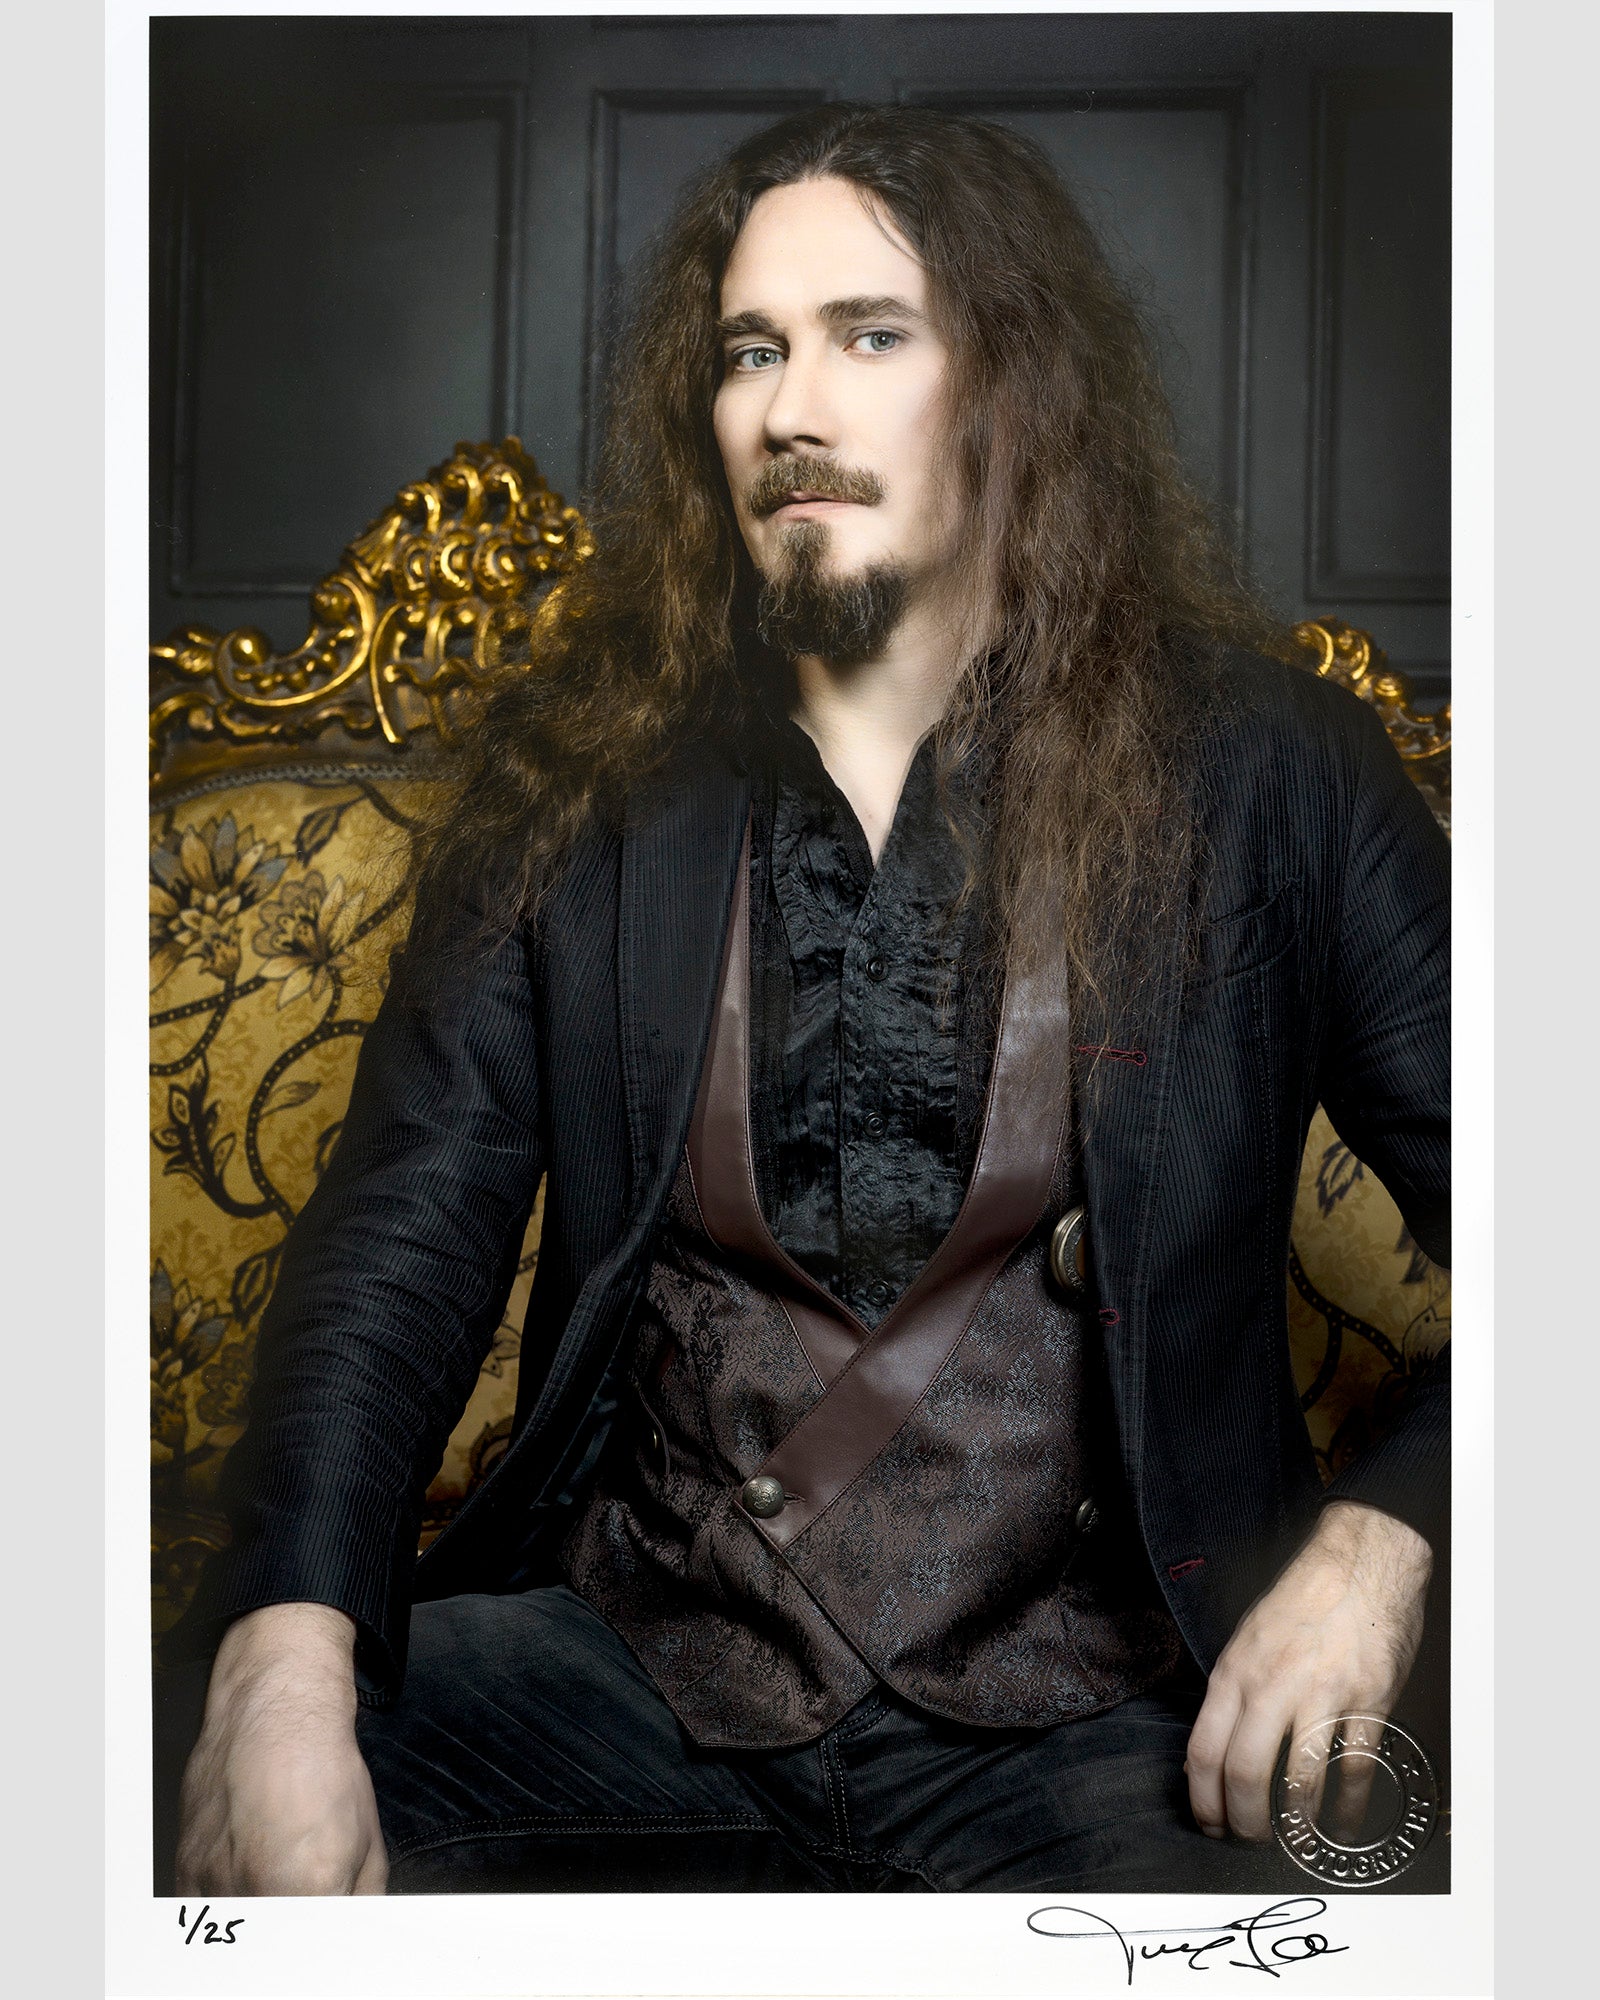 Autographed print of Tuomas Holopainen of Finnish symphonic metal band Nightwish, sitting on elaborate gold sofa. Signed by the artist. Photo by Tina K Photography.